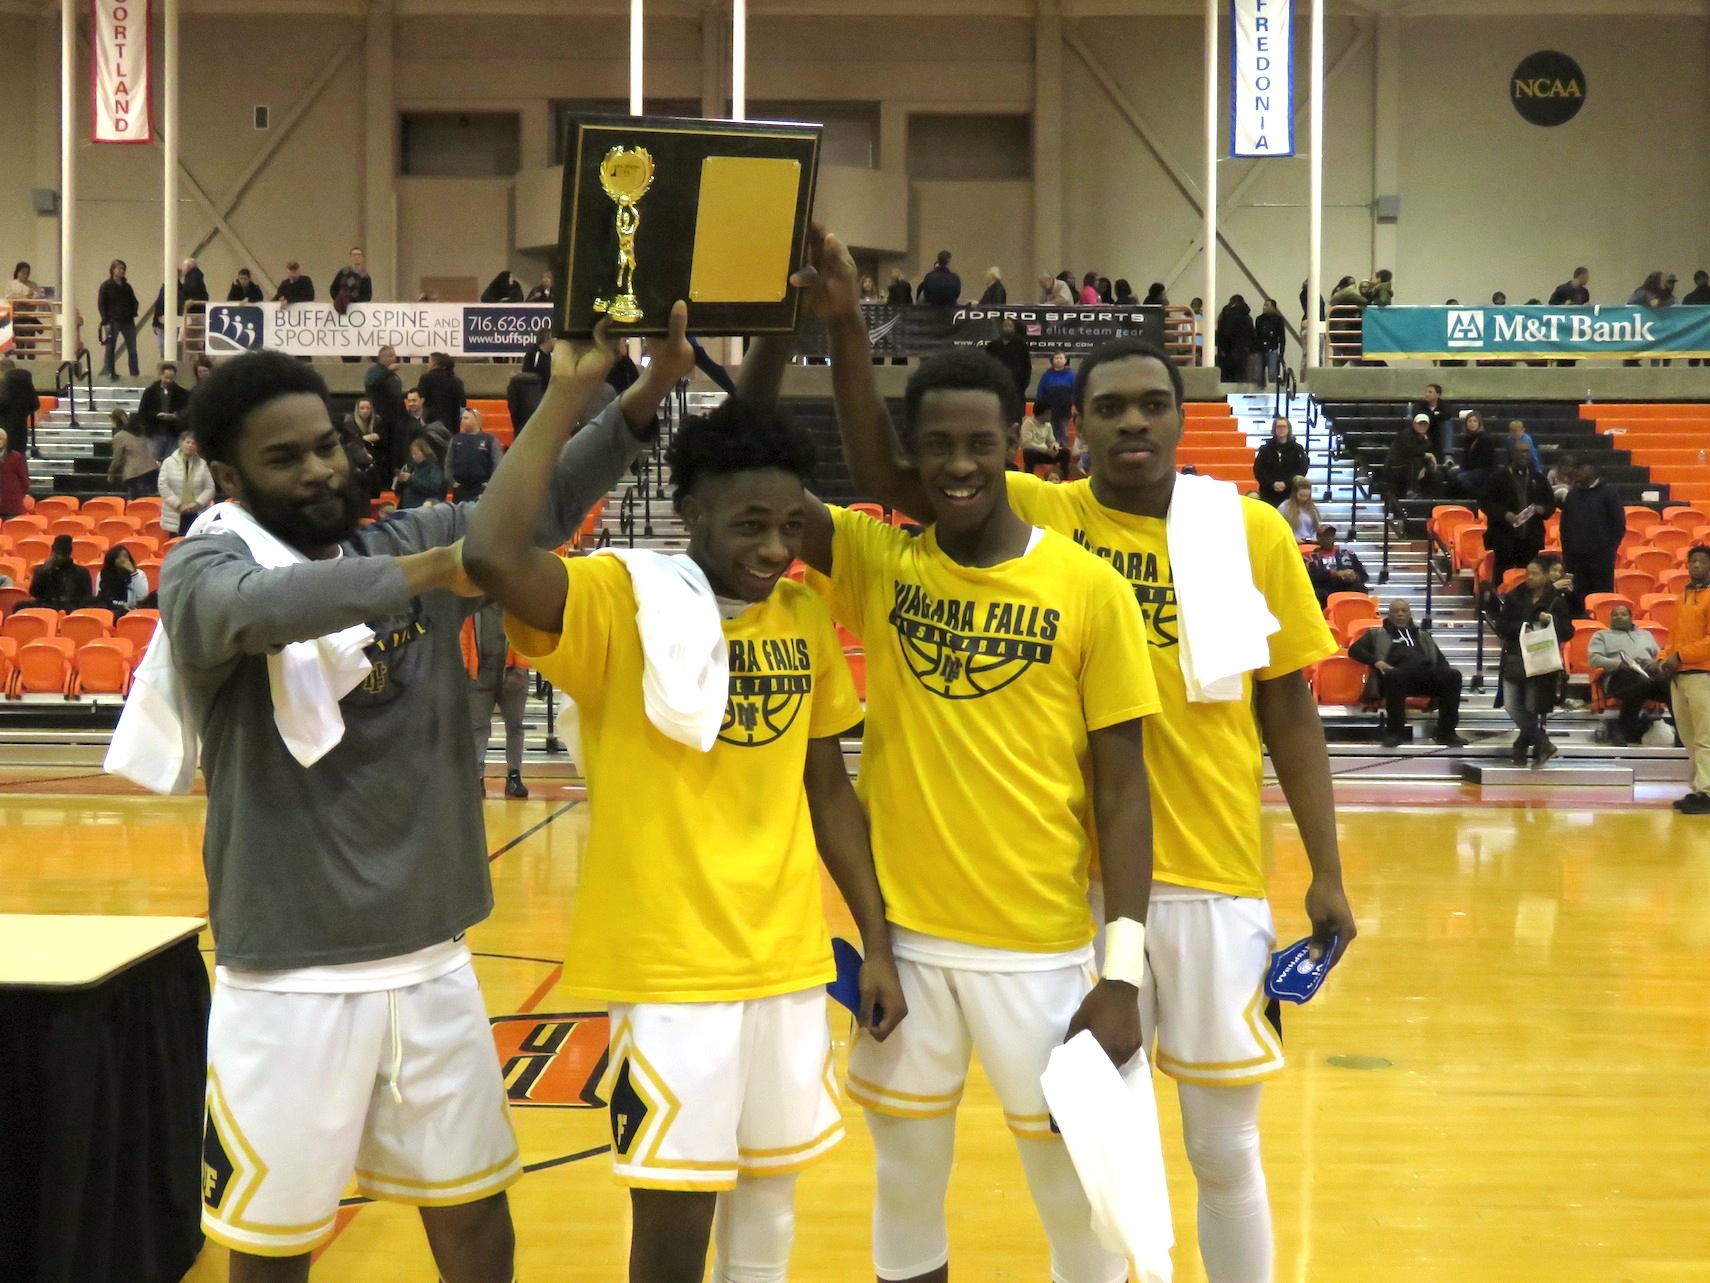 The four seniors for the Wolverines receive their Section VI championship plaque. From left: Marquise Miller, Tazaun Rose, Quran Dubois and Syquan Ralands. (Photo by David Yarger)